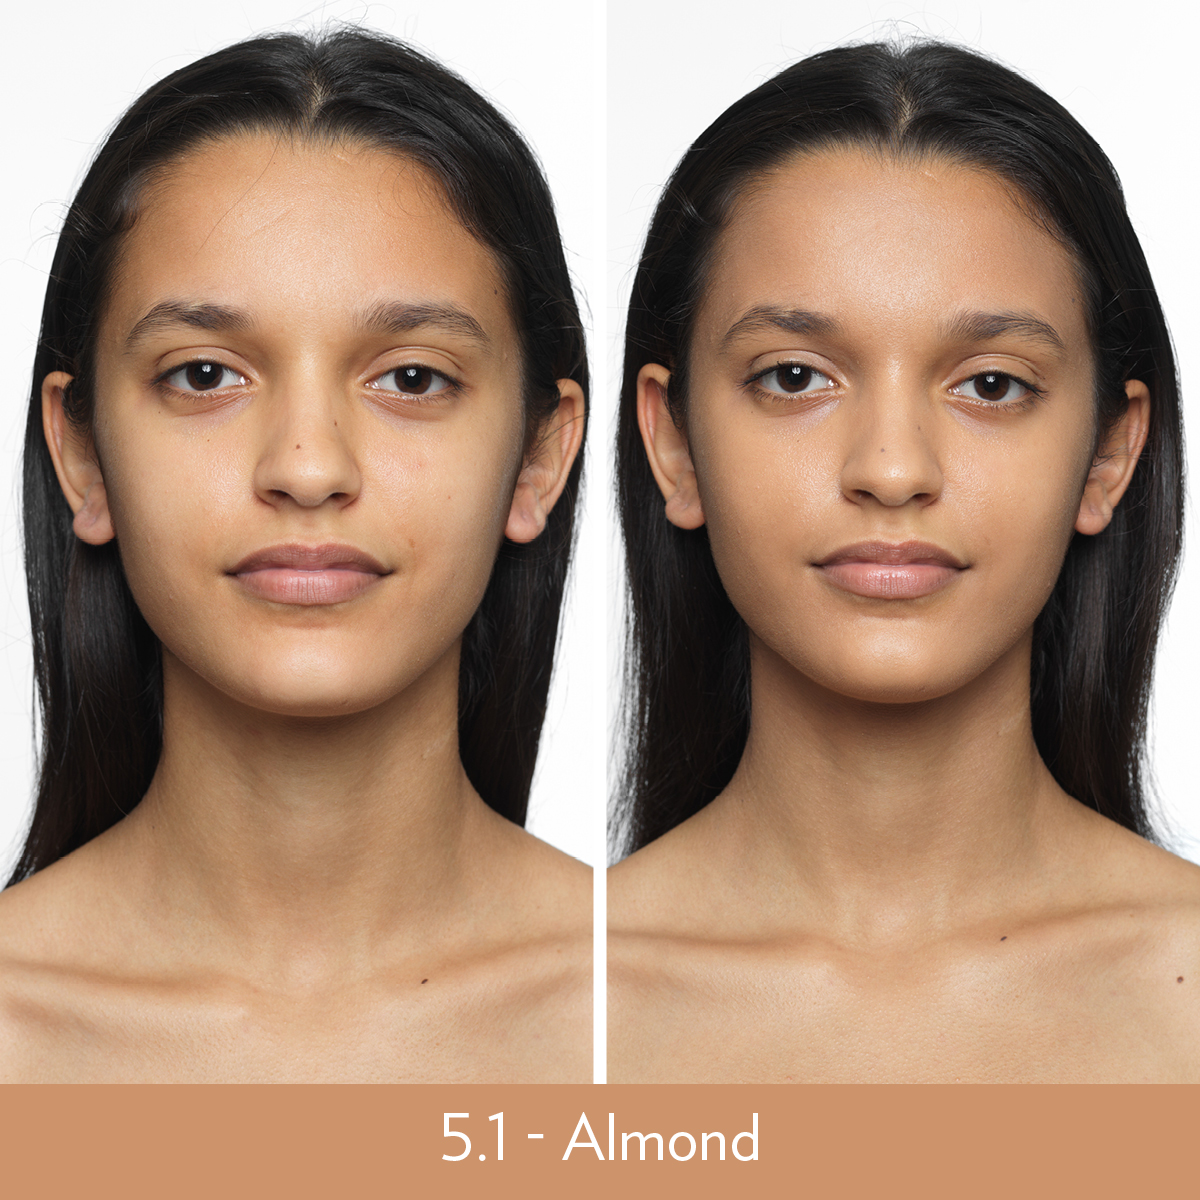 Nu Skin BB+ Skin Loving Foundation 5.1 Almond Before and After